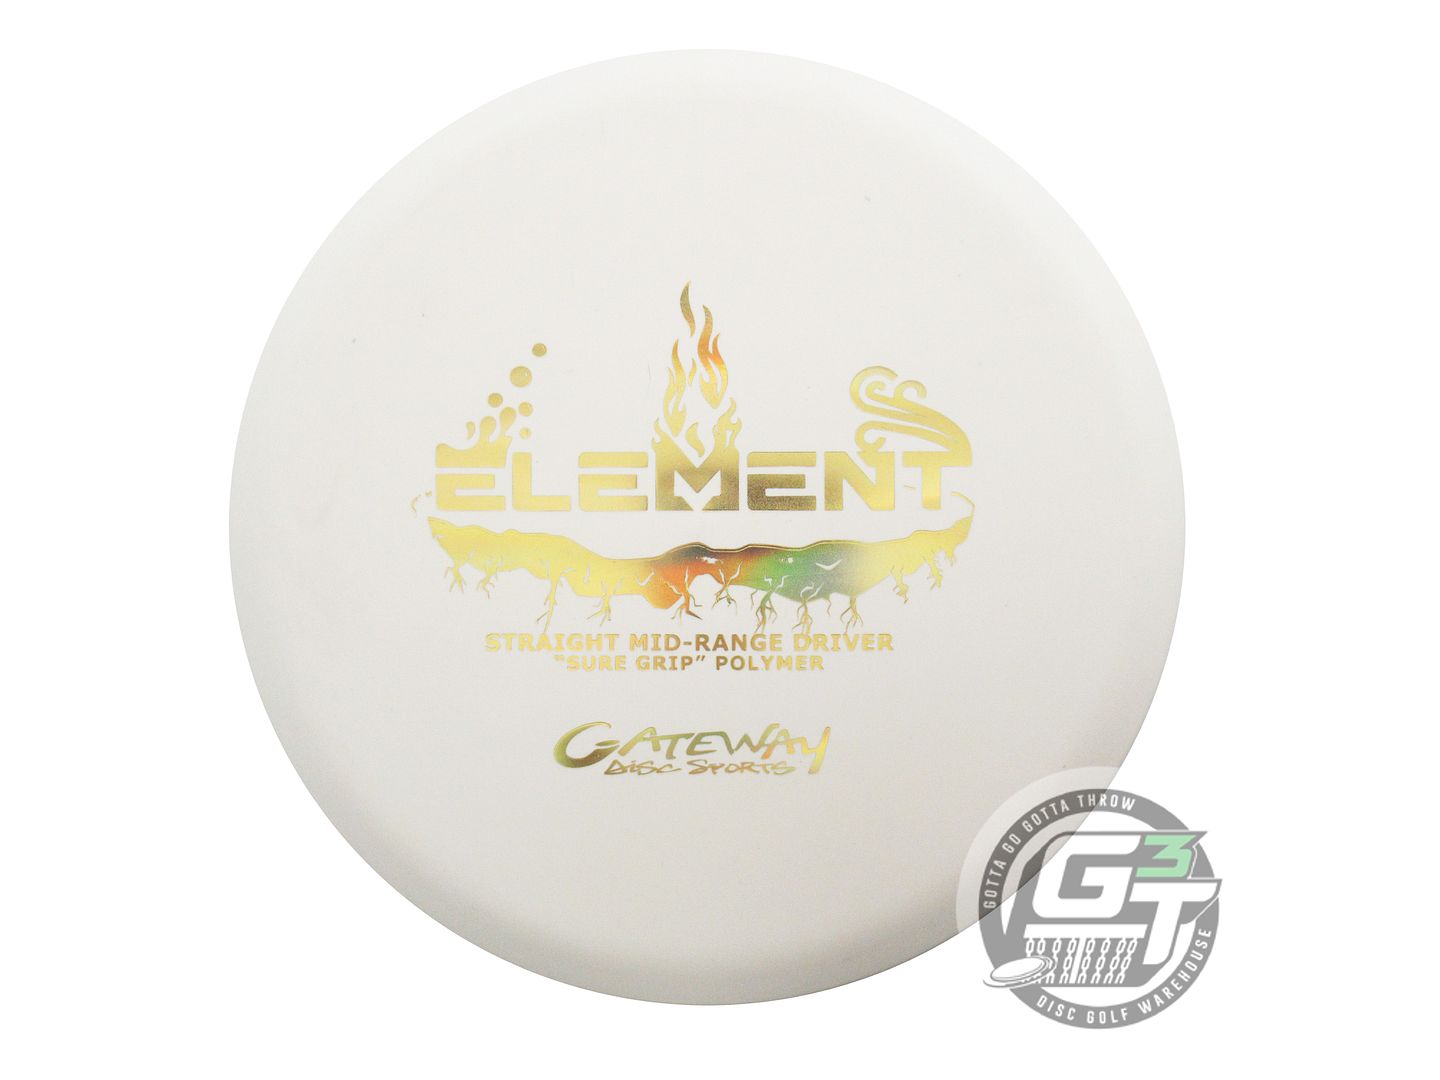 Gateway Sure Grip Element Midrange Golf Disc (Individually Listed)